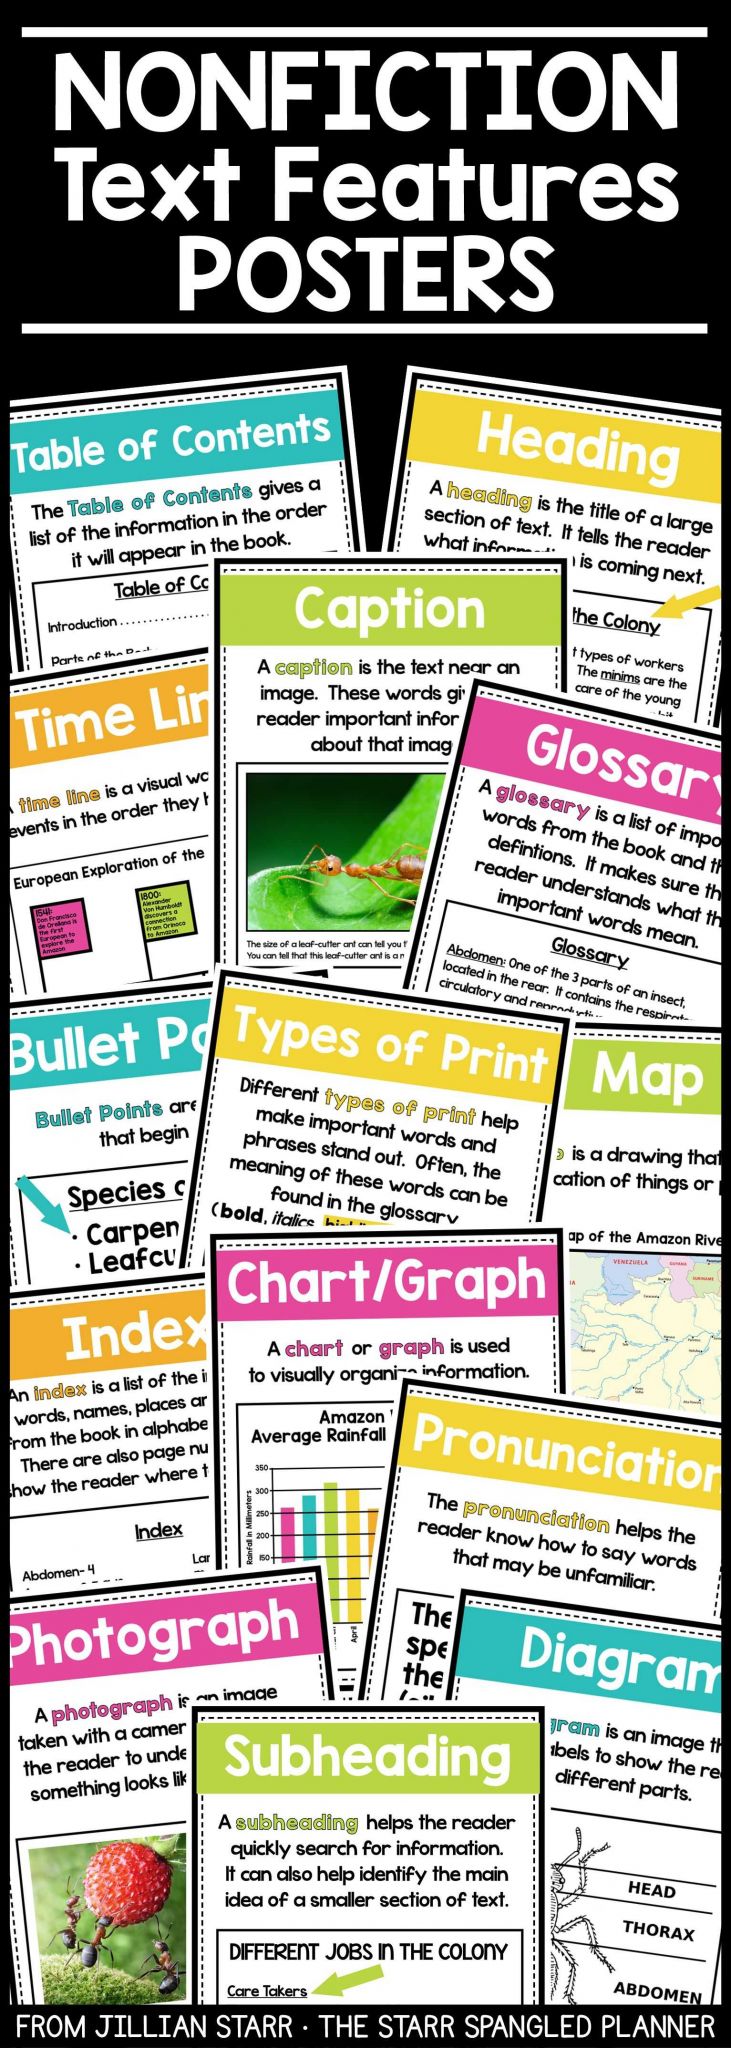 Nonfiction Text Features Worksheet with Nonfiction Text Features Posters & Activities